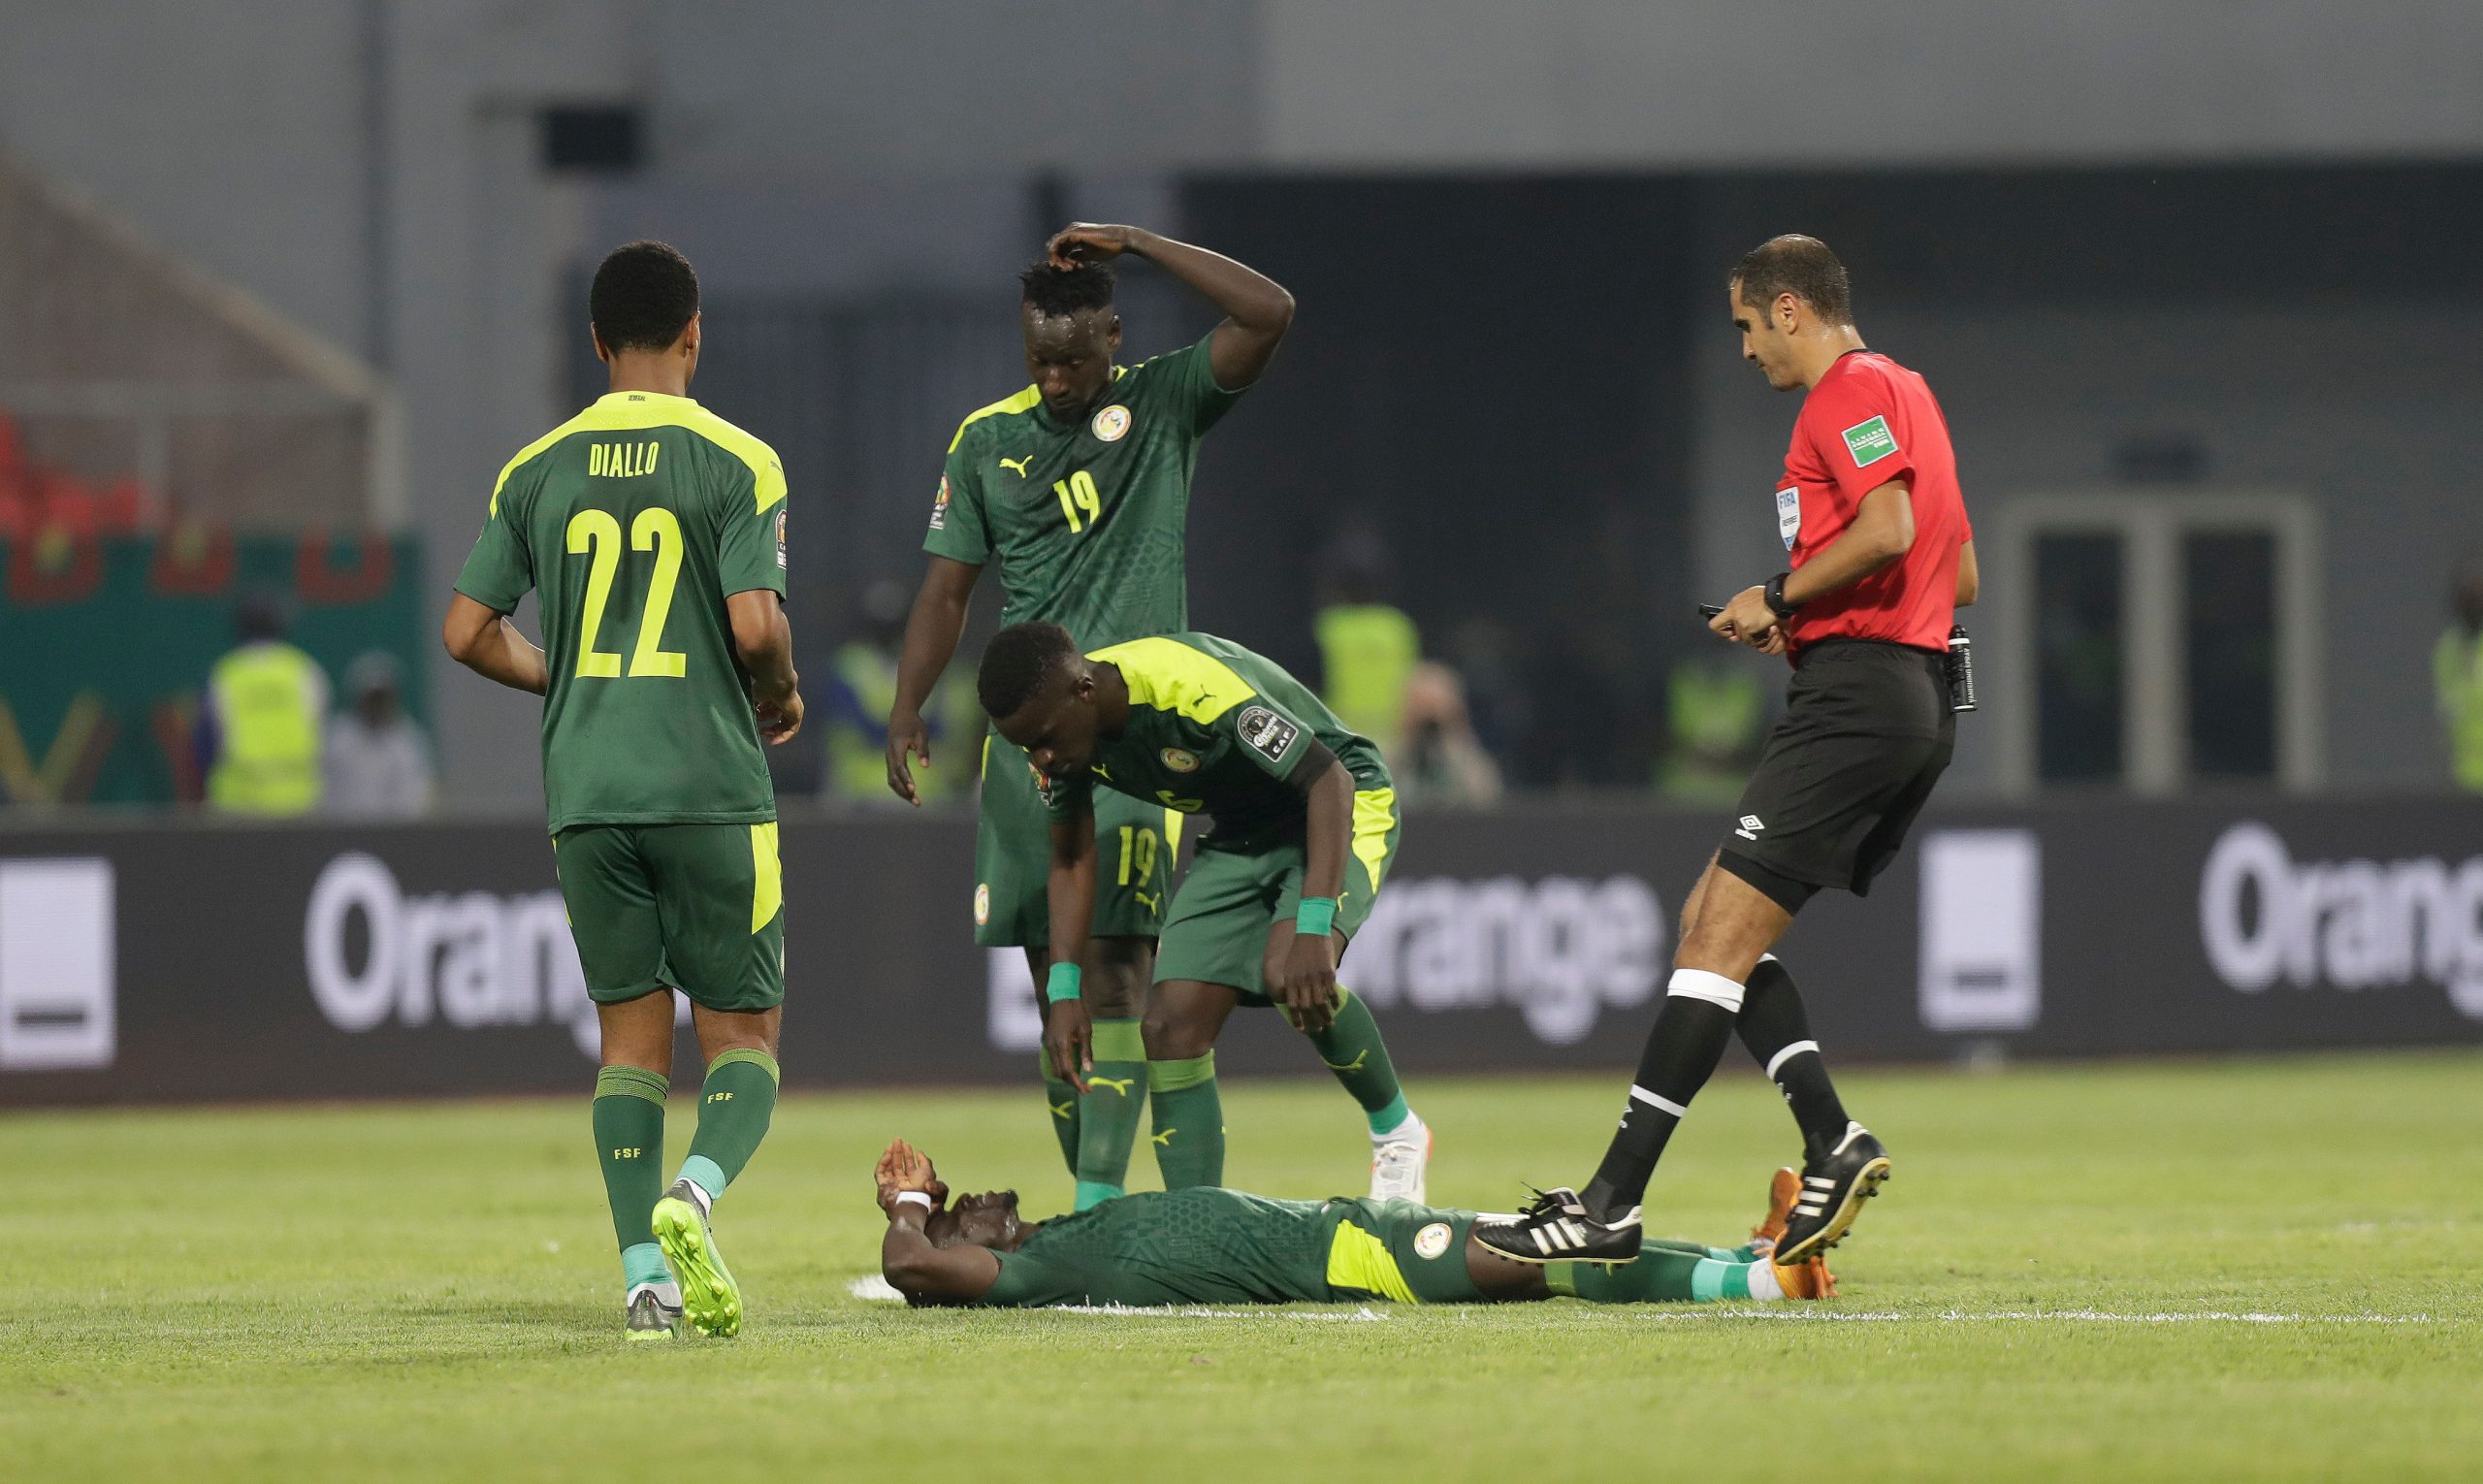 AFCON: Sadio Mane says everything is fine after suffering concussion